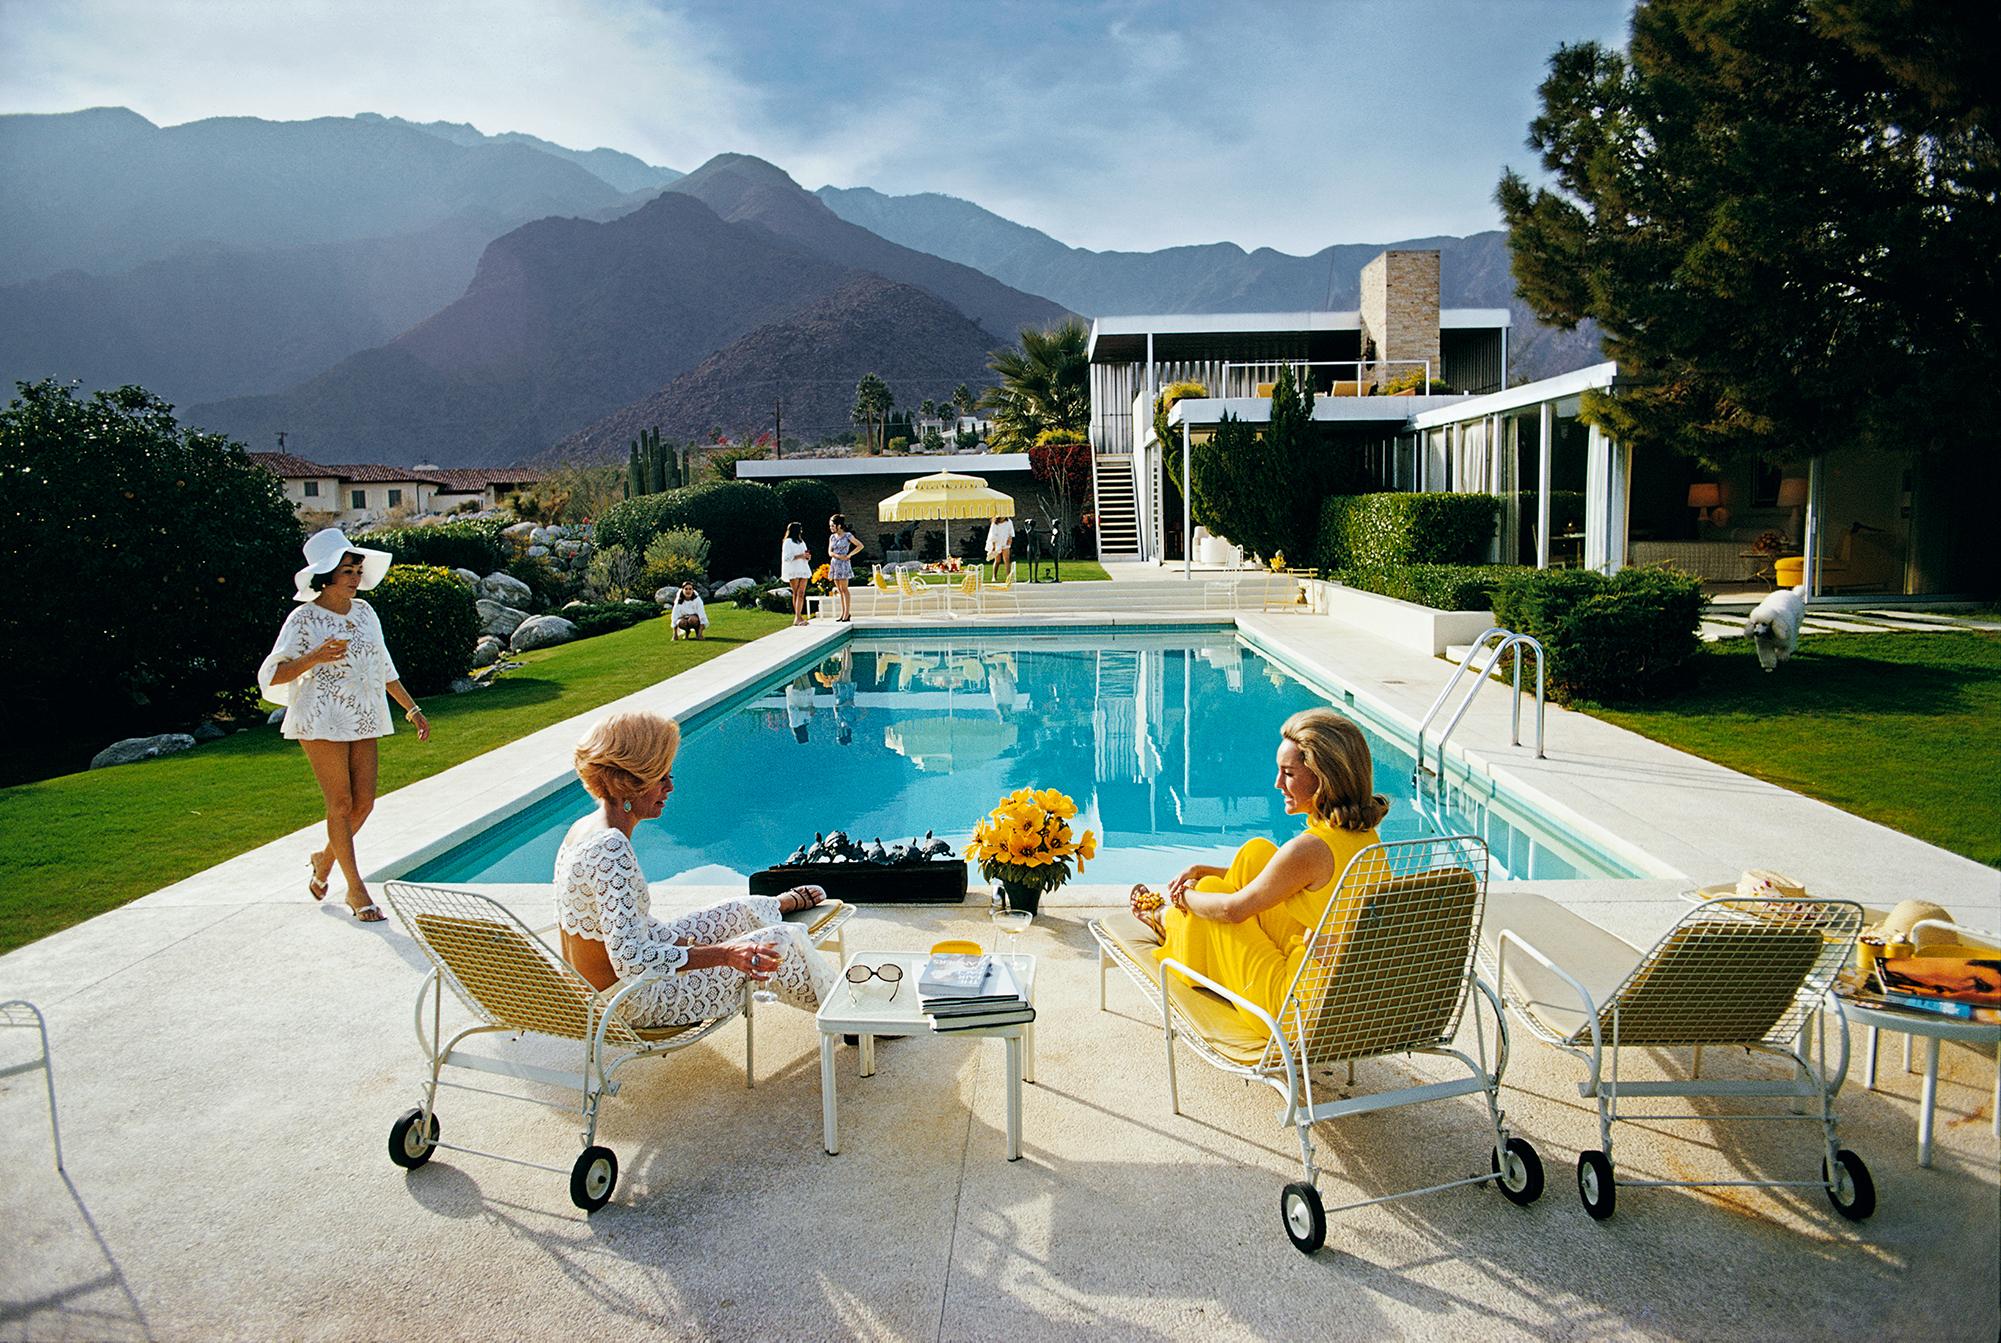 Catch Up by the Pool (Kaufmann Desert House)
1970 

Former fashion model Helen Dzo Dzo Kaptur (in white lace), Nelda Linsk (in yellow), wife of art dealer Joseph Linsk, and actress Lita Baron (in white sunhat) at the Kaufmann Desert House in Palm